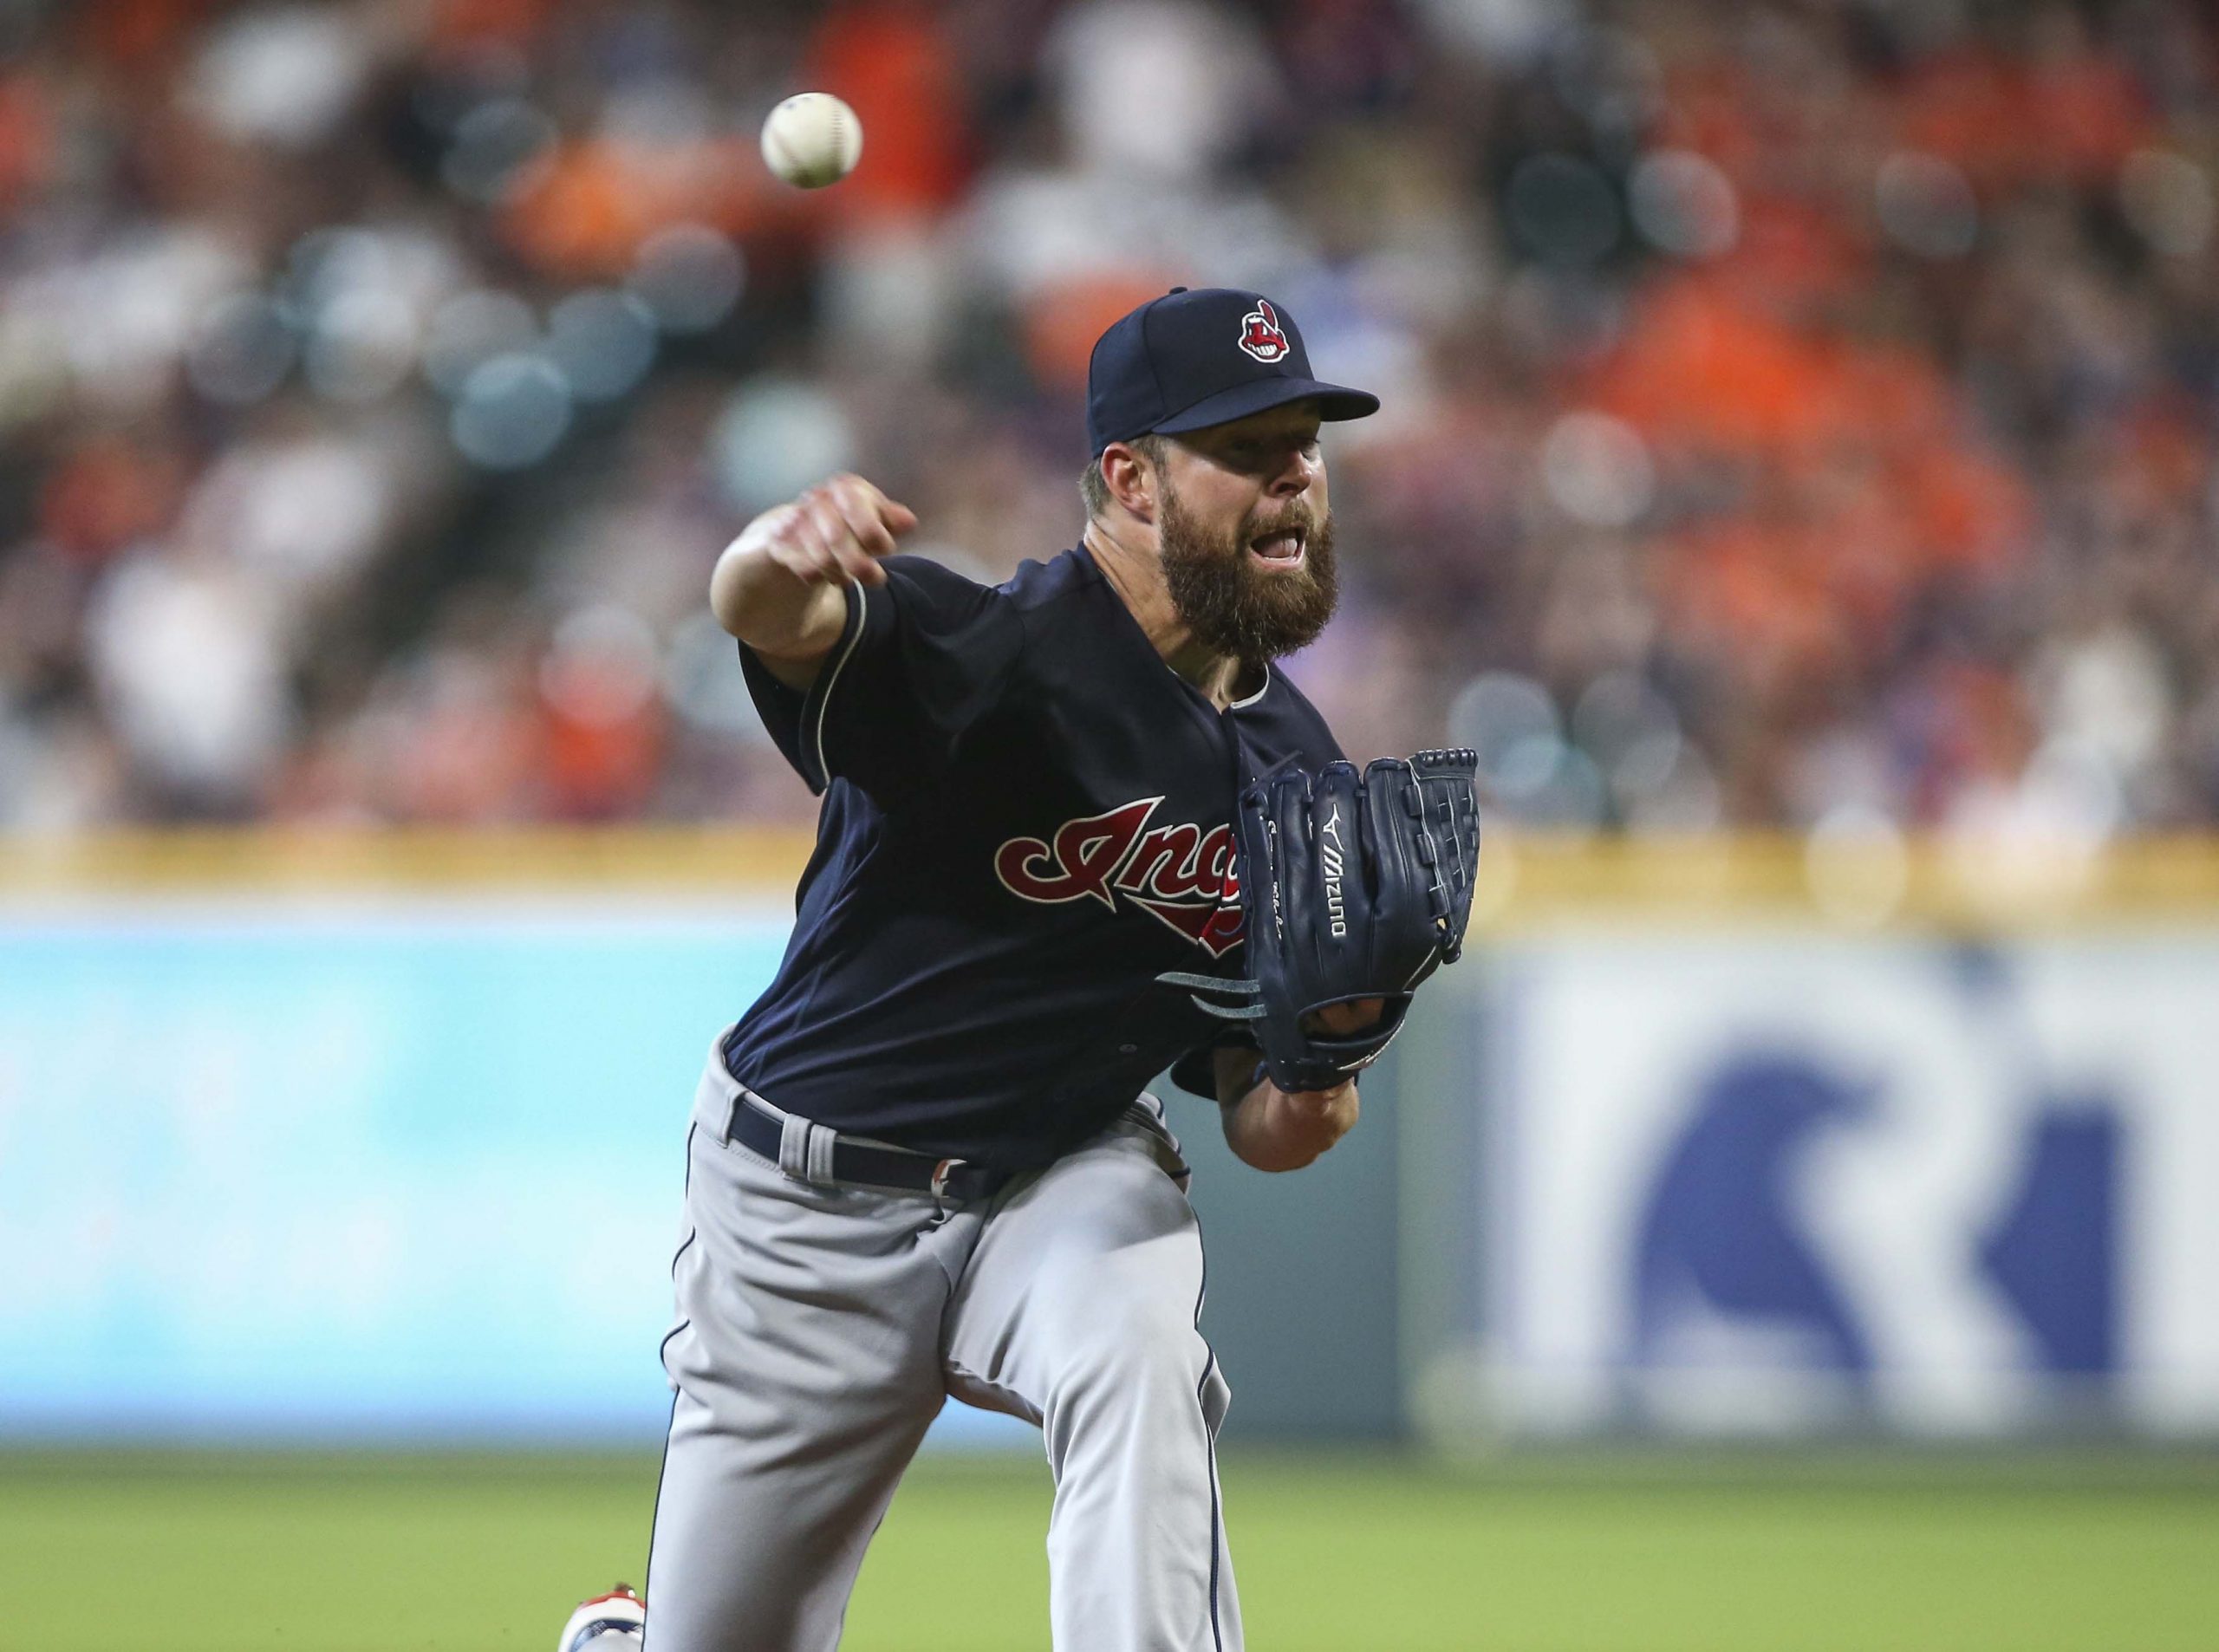 MLB: Cleveland Indians at Houston Astros